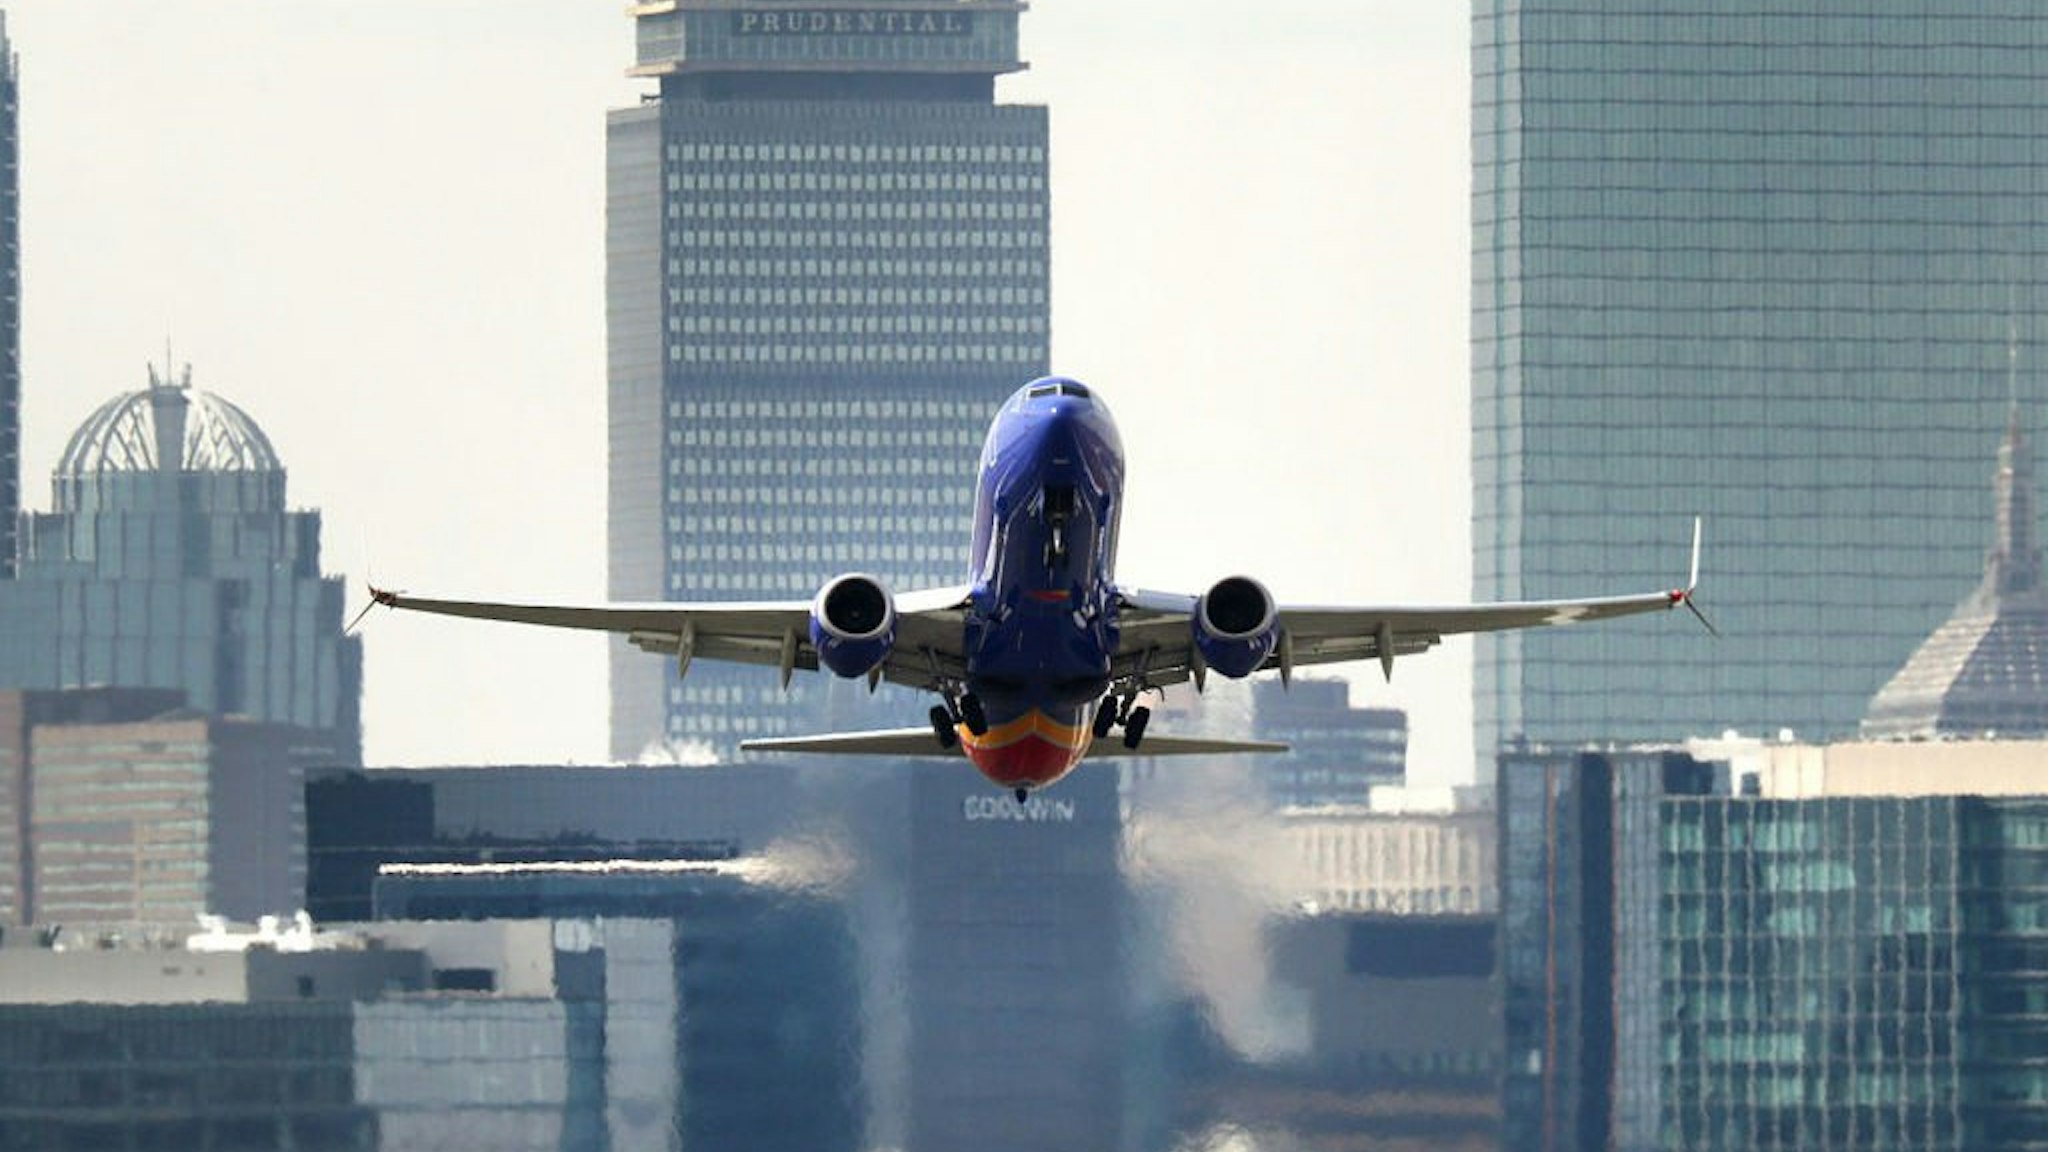 A Southwest Airlines flight takes off from Boston Logan International Airport as seen from Winthrop, MA on March 13, 2019.